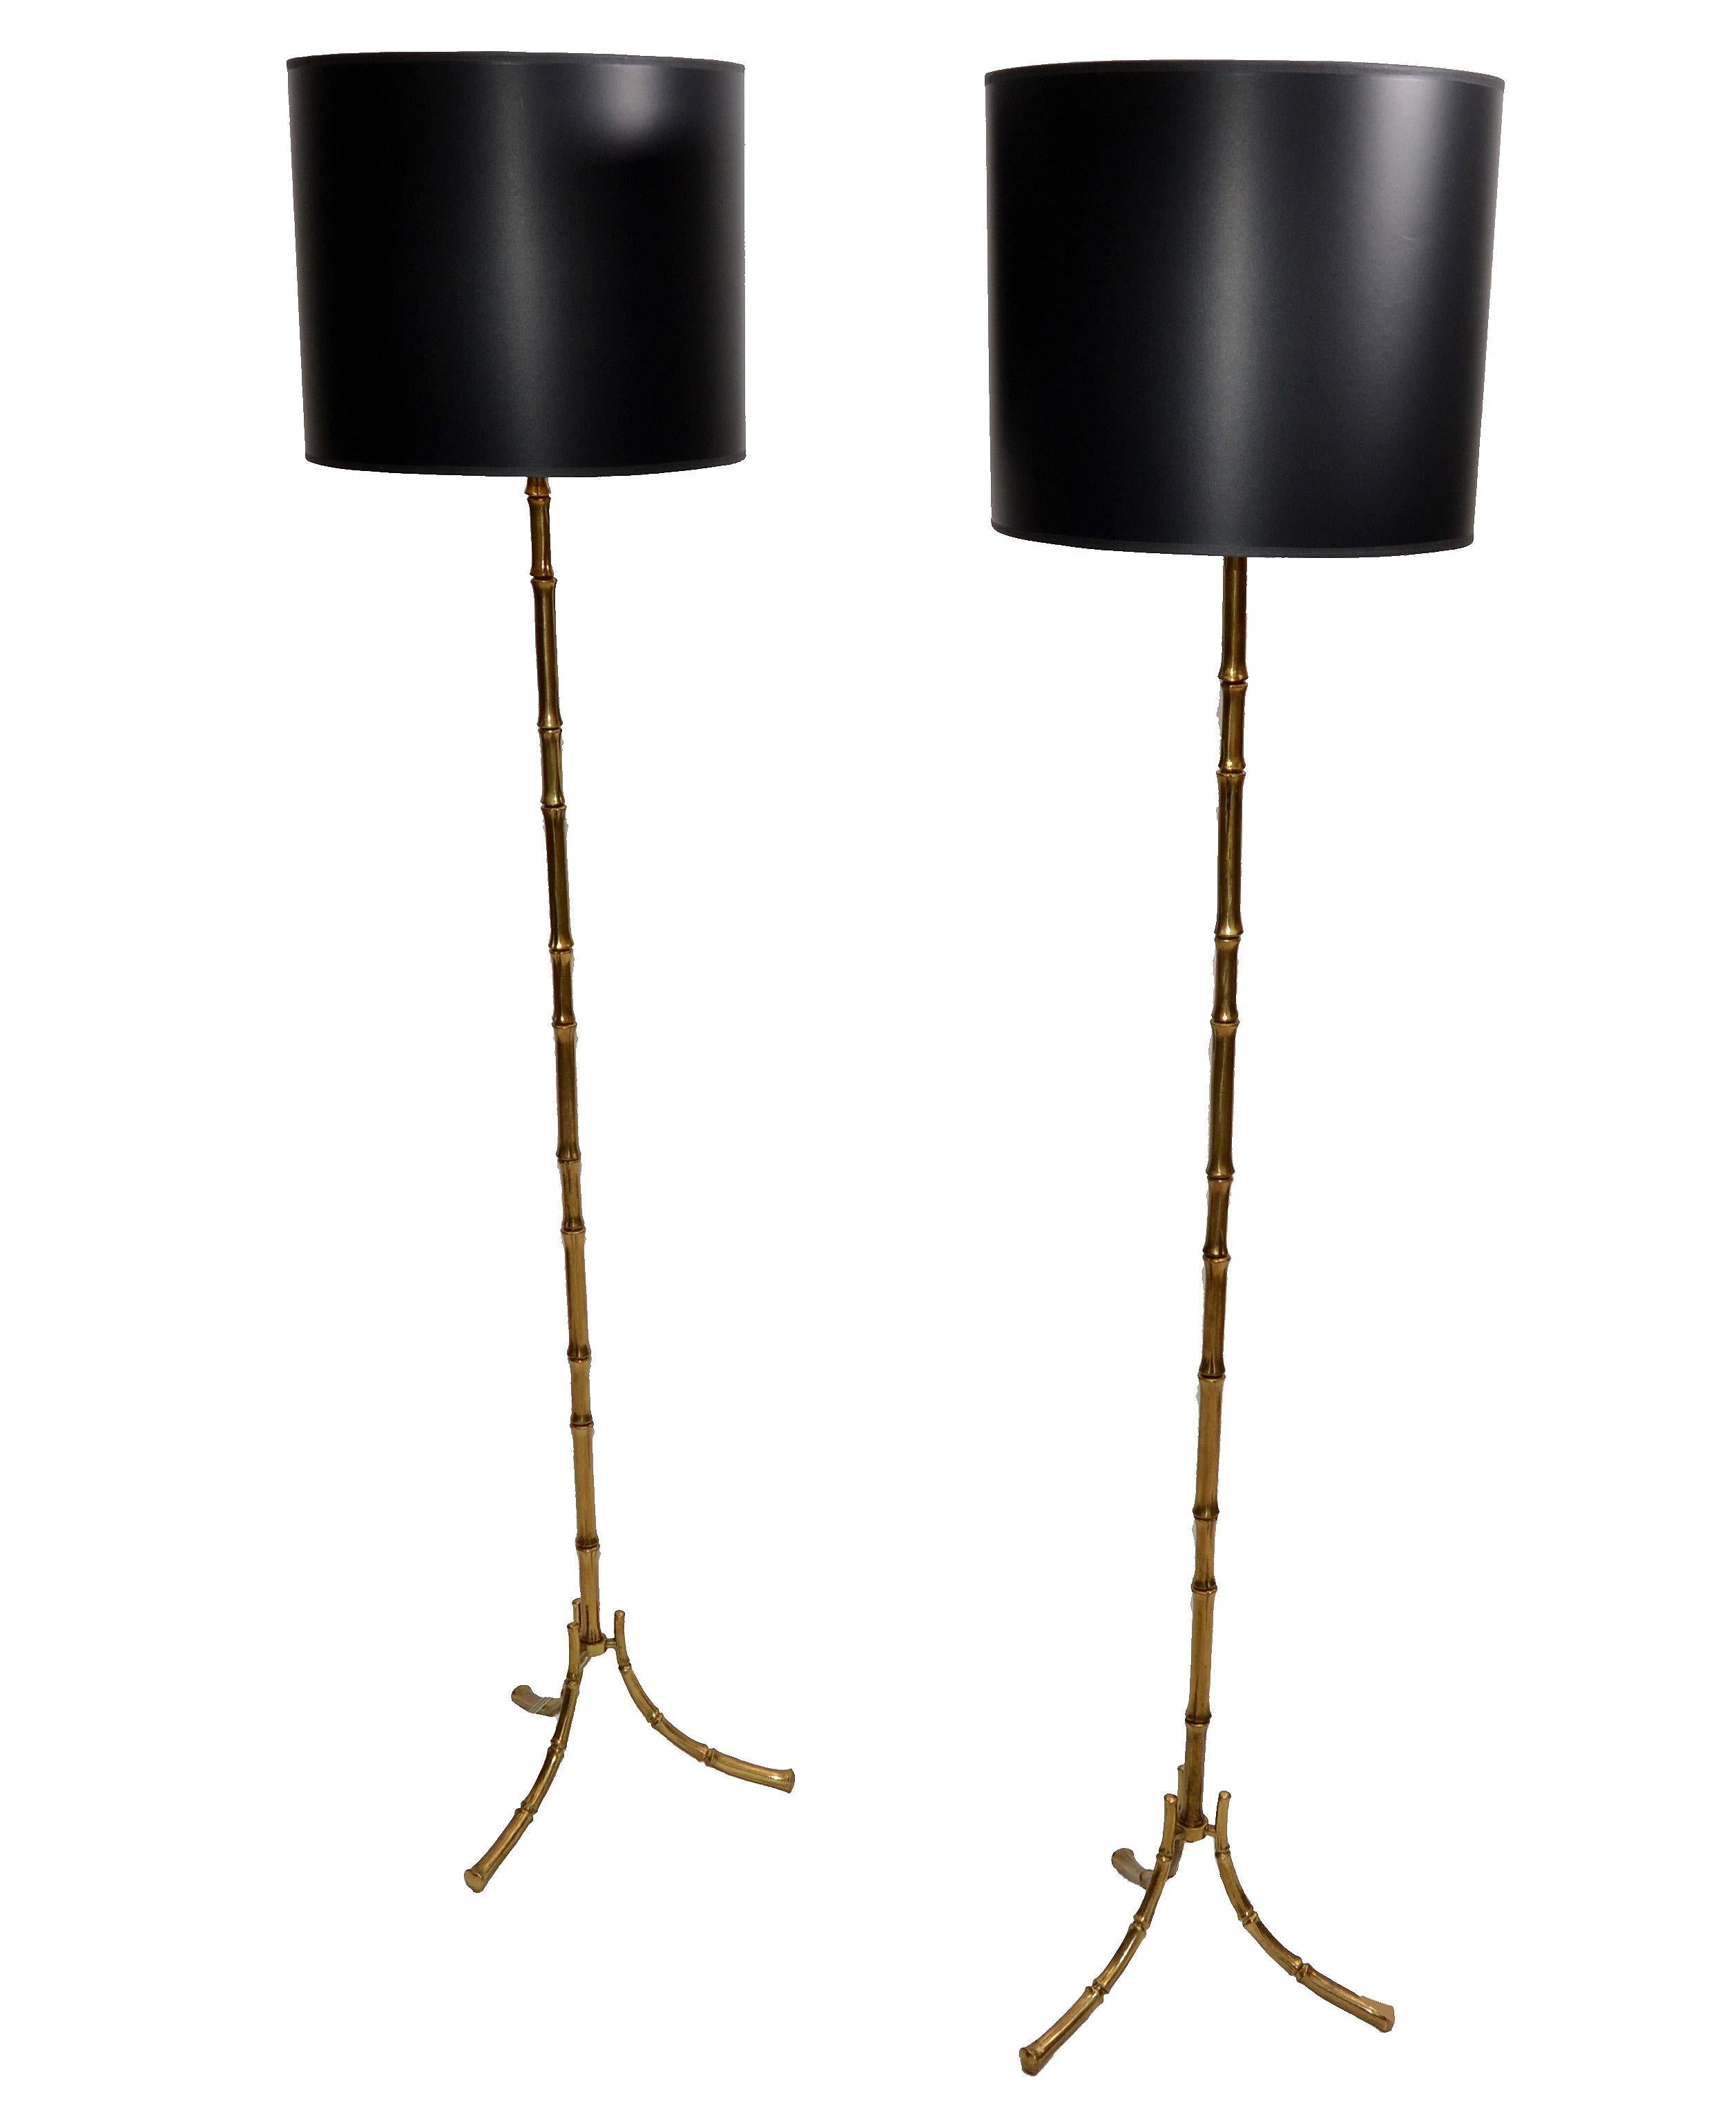 Hand-Crafted Maison Baguès French Hollywood Regency Bronze Faux Bamboo Floor Lamp 1960 - Pair For Sale